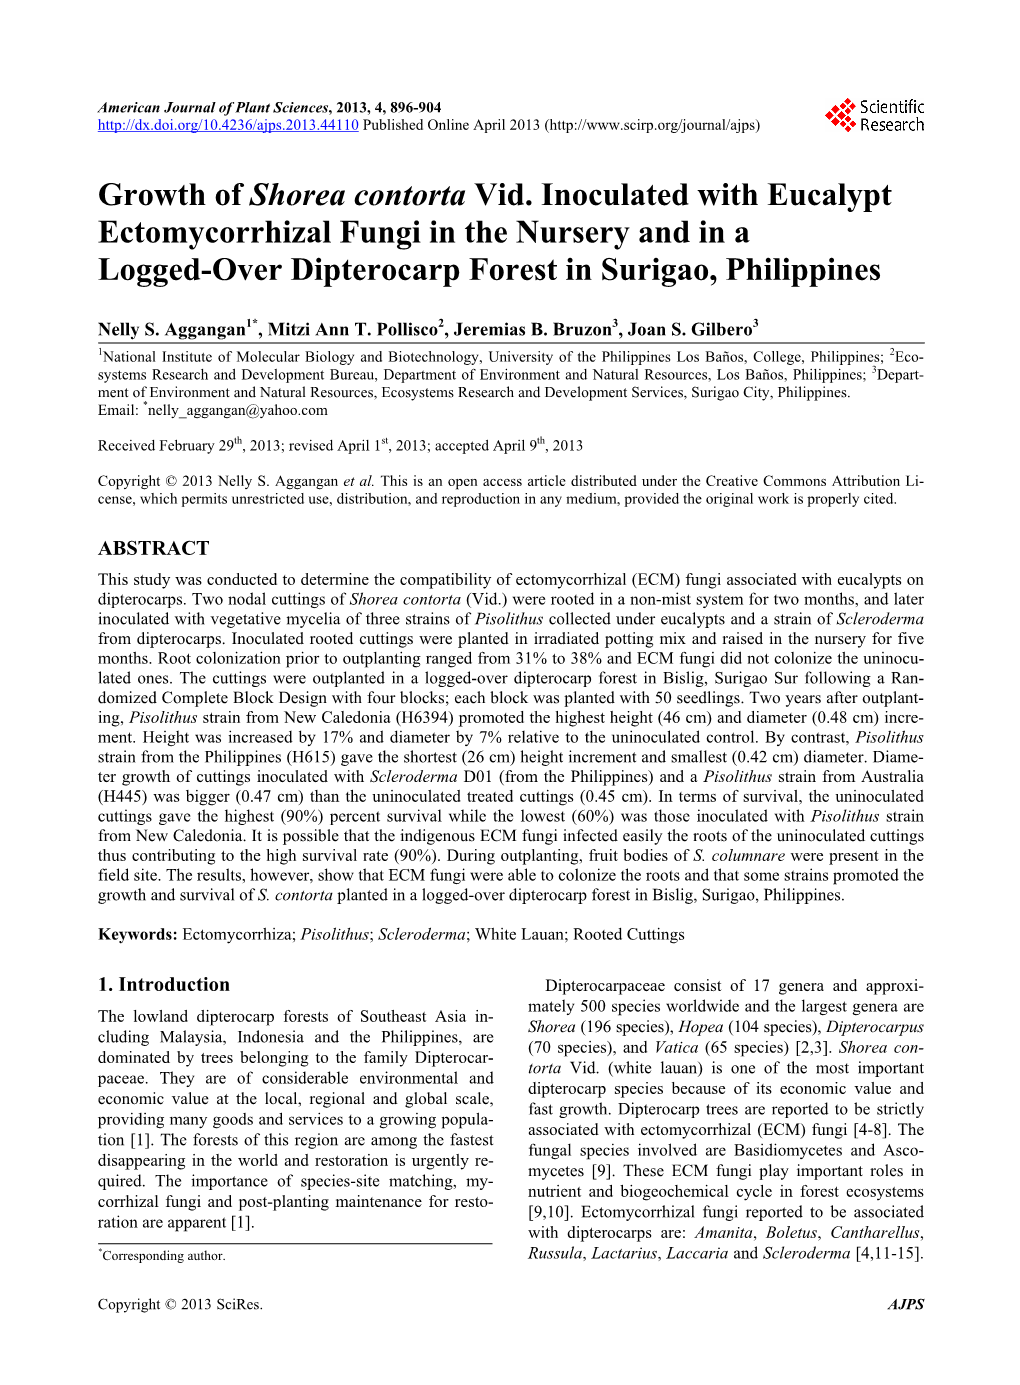 Growth of Shorea Contorta Vid. Inoculated with Eucalypt Ectomycorrhizal Fungi in the Nursery and in a Logged-Over Dipterocarp Forest in Surigao, Philippines